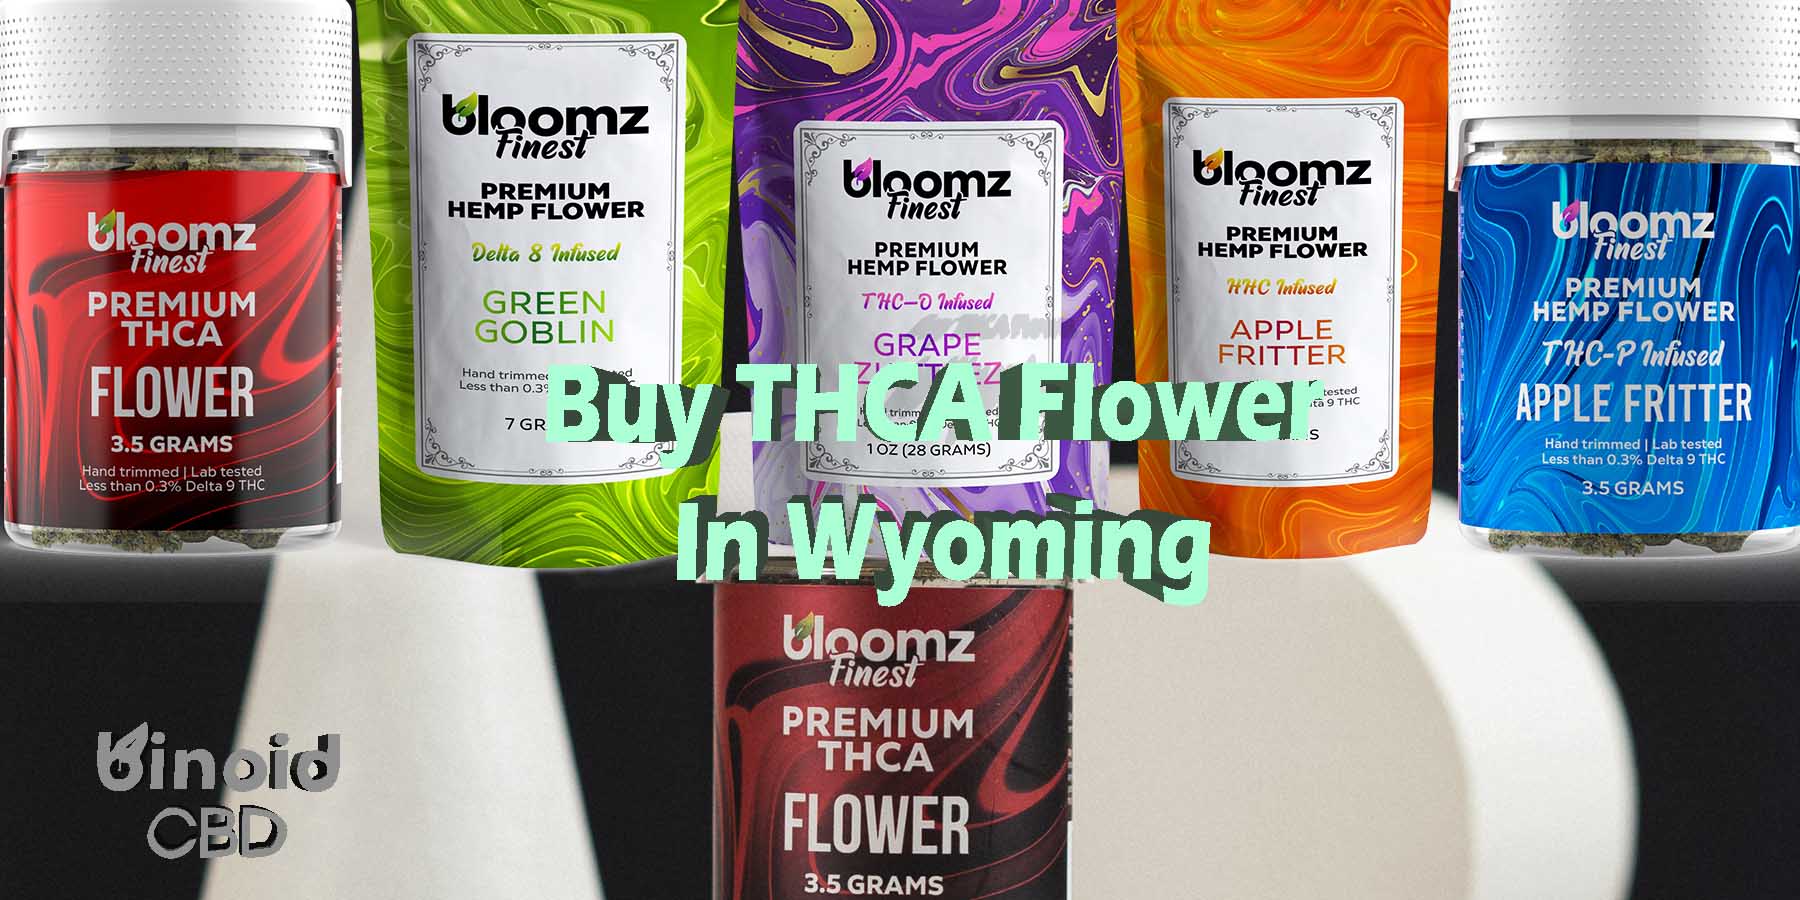 Buy THCA Flower In Wyoming Where To Get Near Me Best Place Lowest Price Coupon Discount Strongest Brand Bloomz